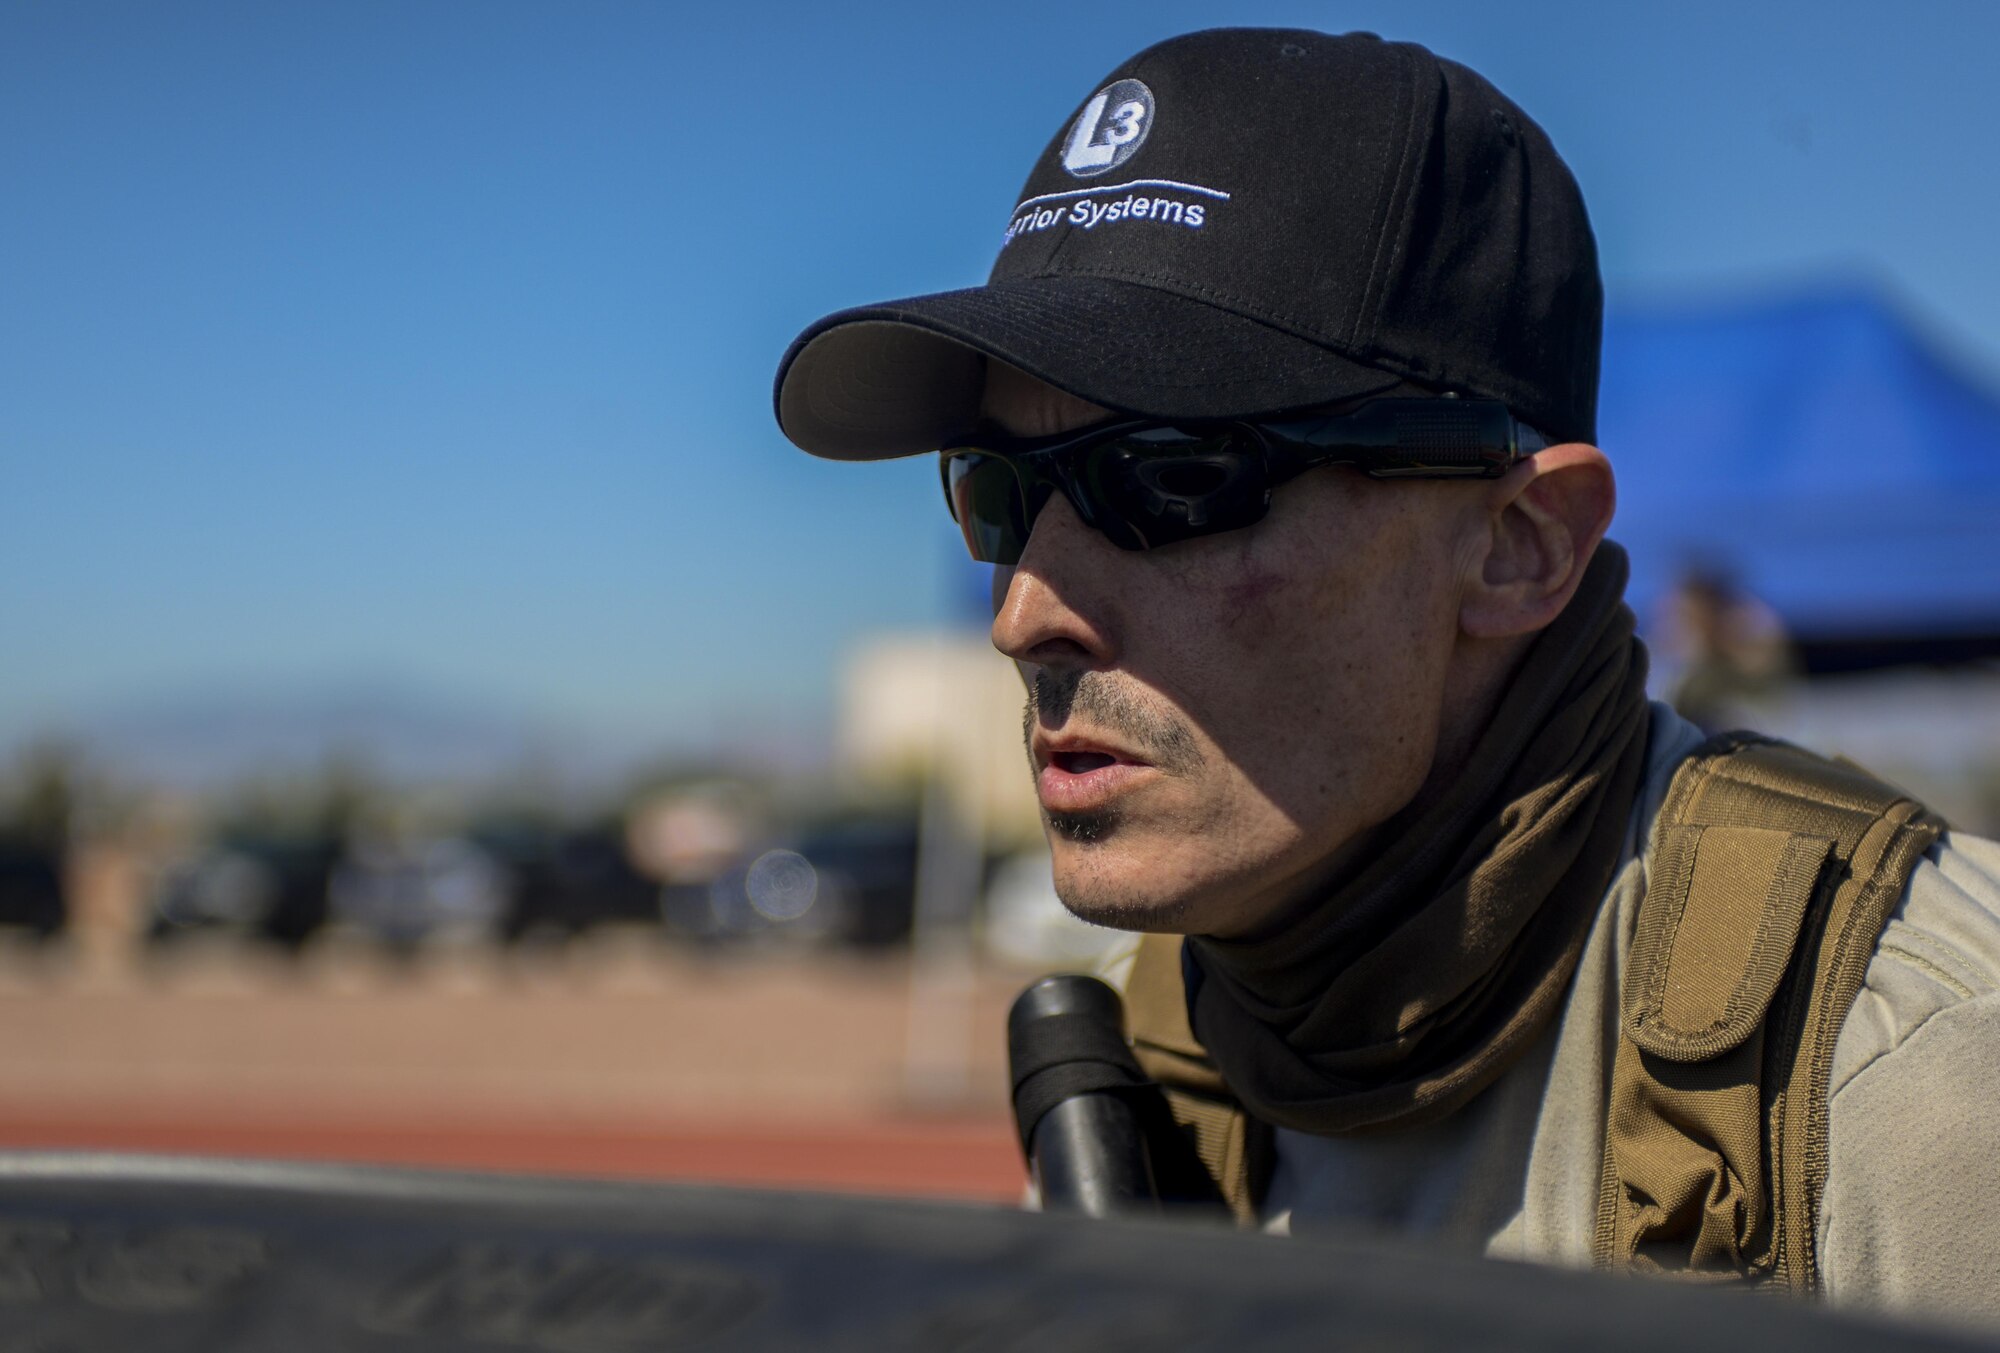 A simulated active shooter waits on the first responding 99th Security Forces Squadron Airmen during a base wide exercise at Nellis Air Force Base, Nev., May 12, 2016. On May 9-12, Nellis AFB conducted the exercise to evaluate real-life response capabilities of emergency personnel and the base populace to a variety of scenarios depicting situations that could impact the base at any time. (U.S. Air Force photo by Airman 1st Class Kevin Tanenbaum)